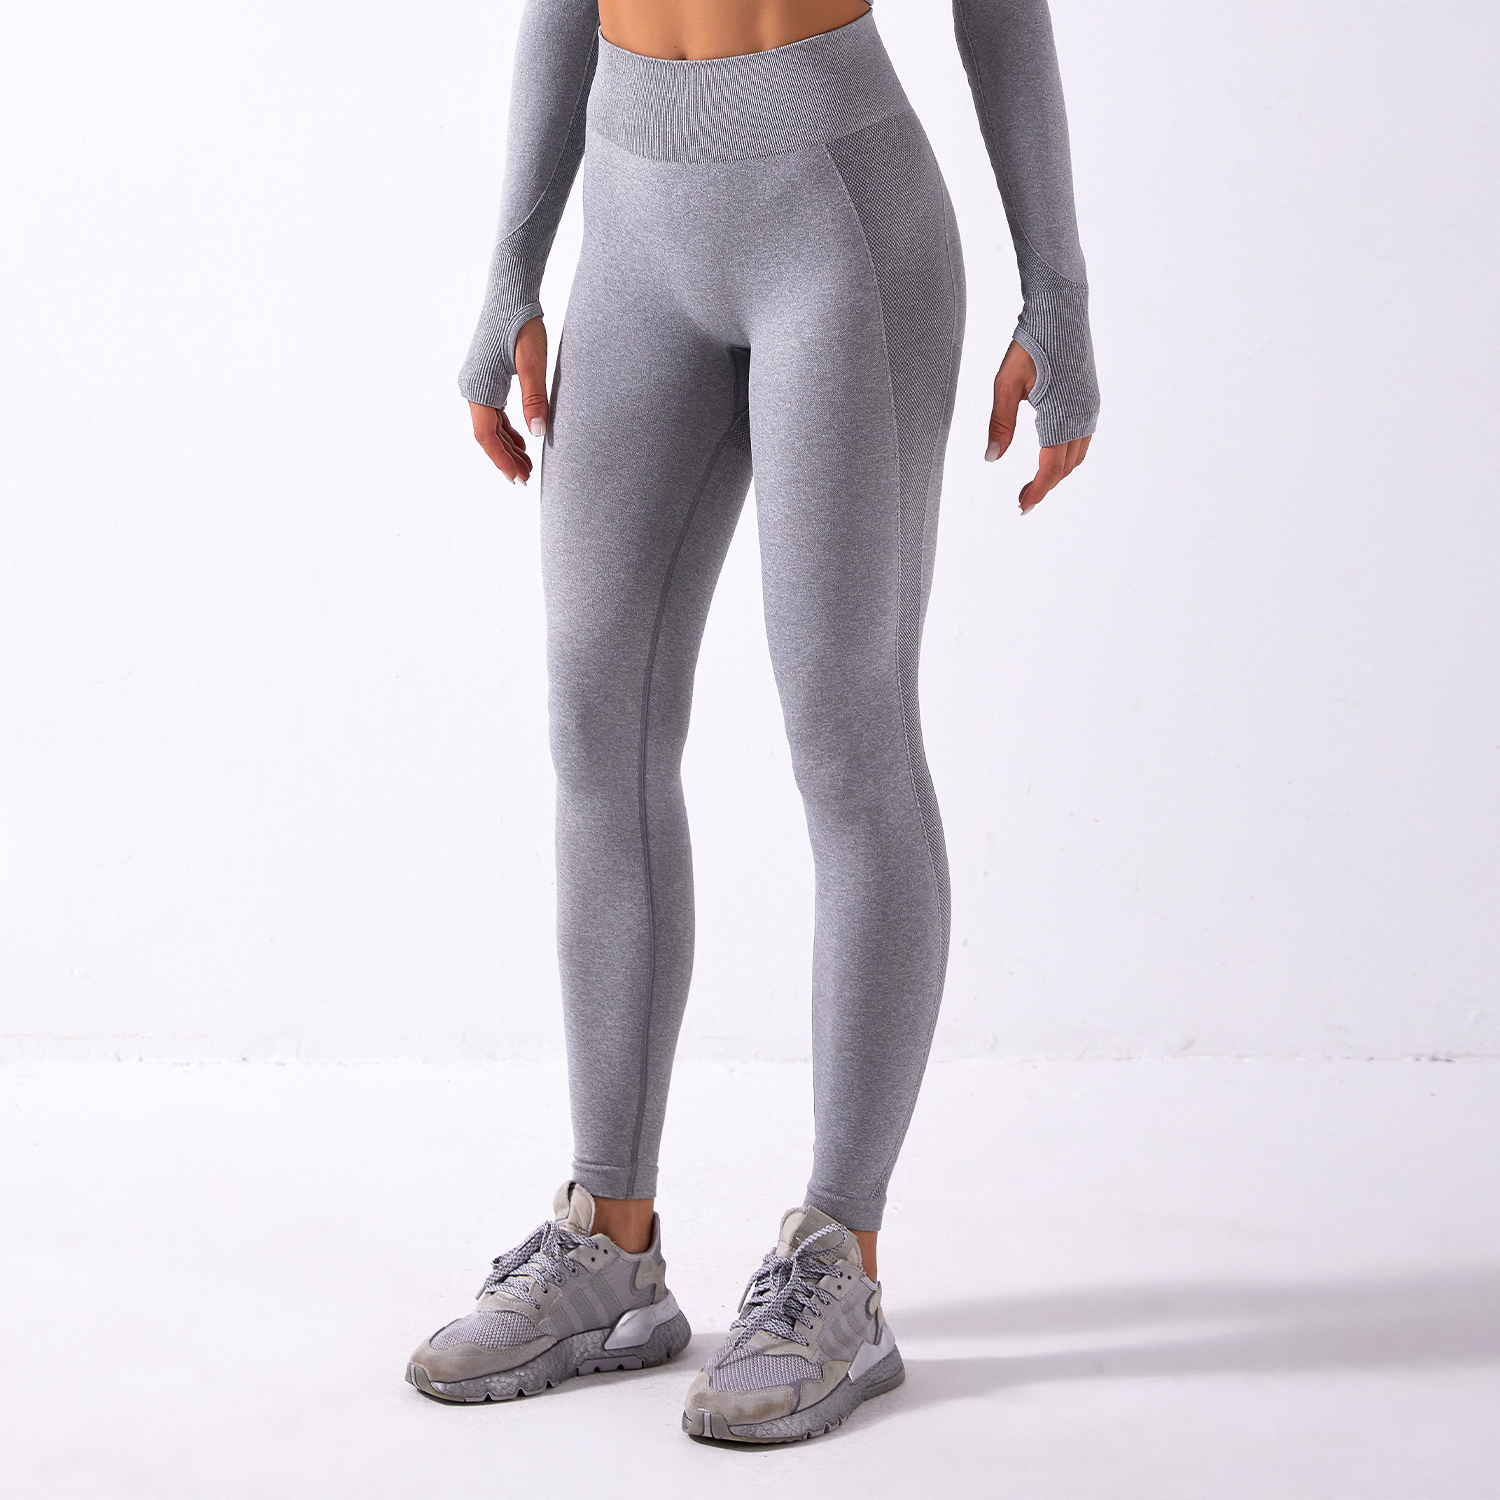 Olive Green Spanx Leggings - China Fitness Clothing